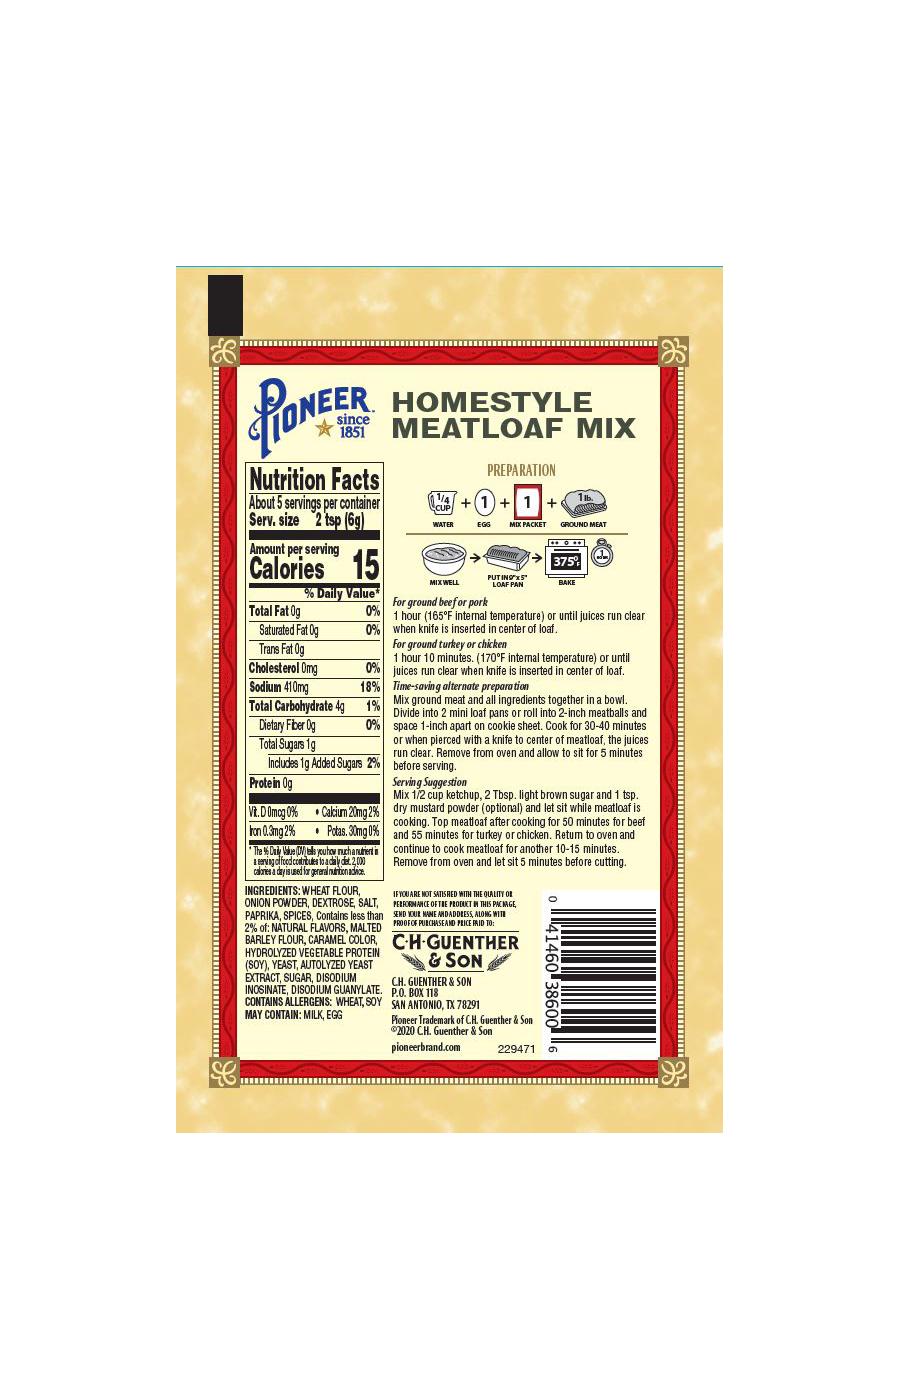 Pioneer Brand Homestyle Meatloaf Mix; image 2 of 2